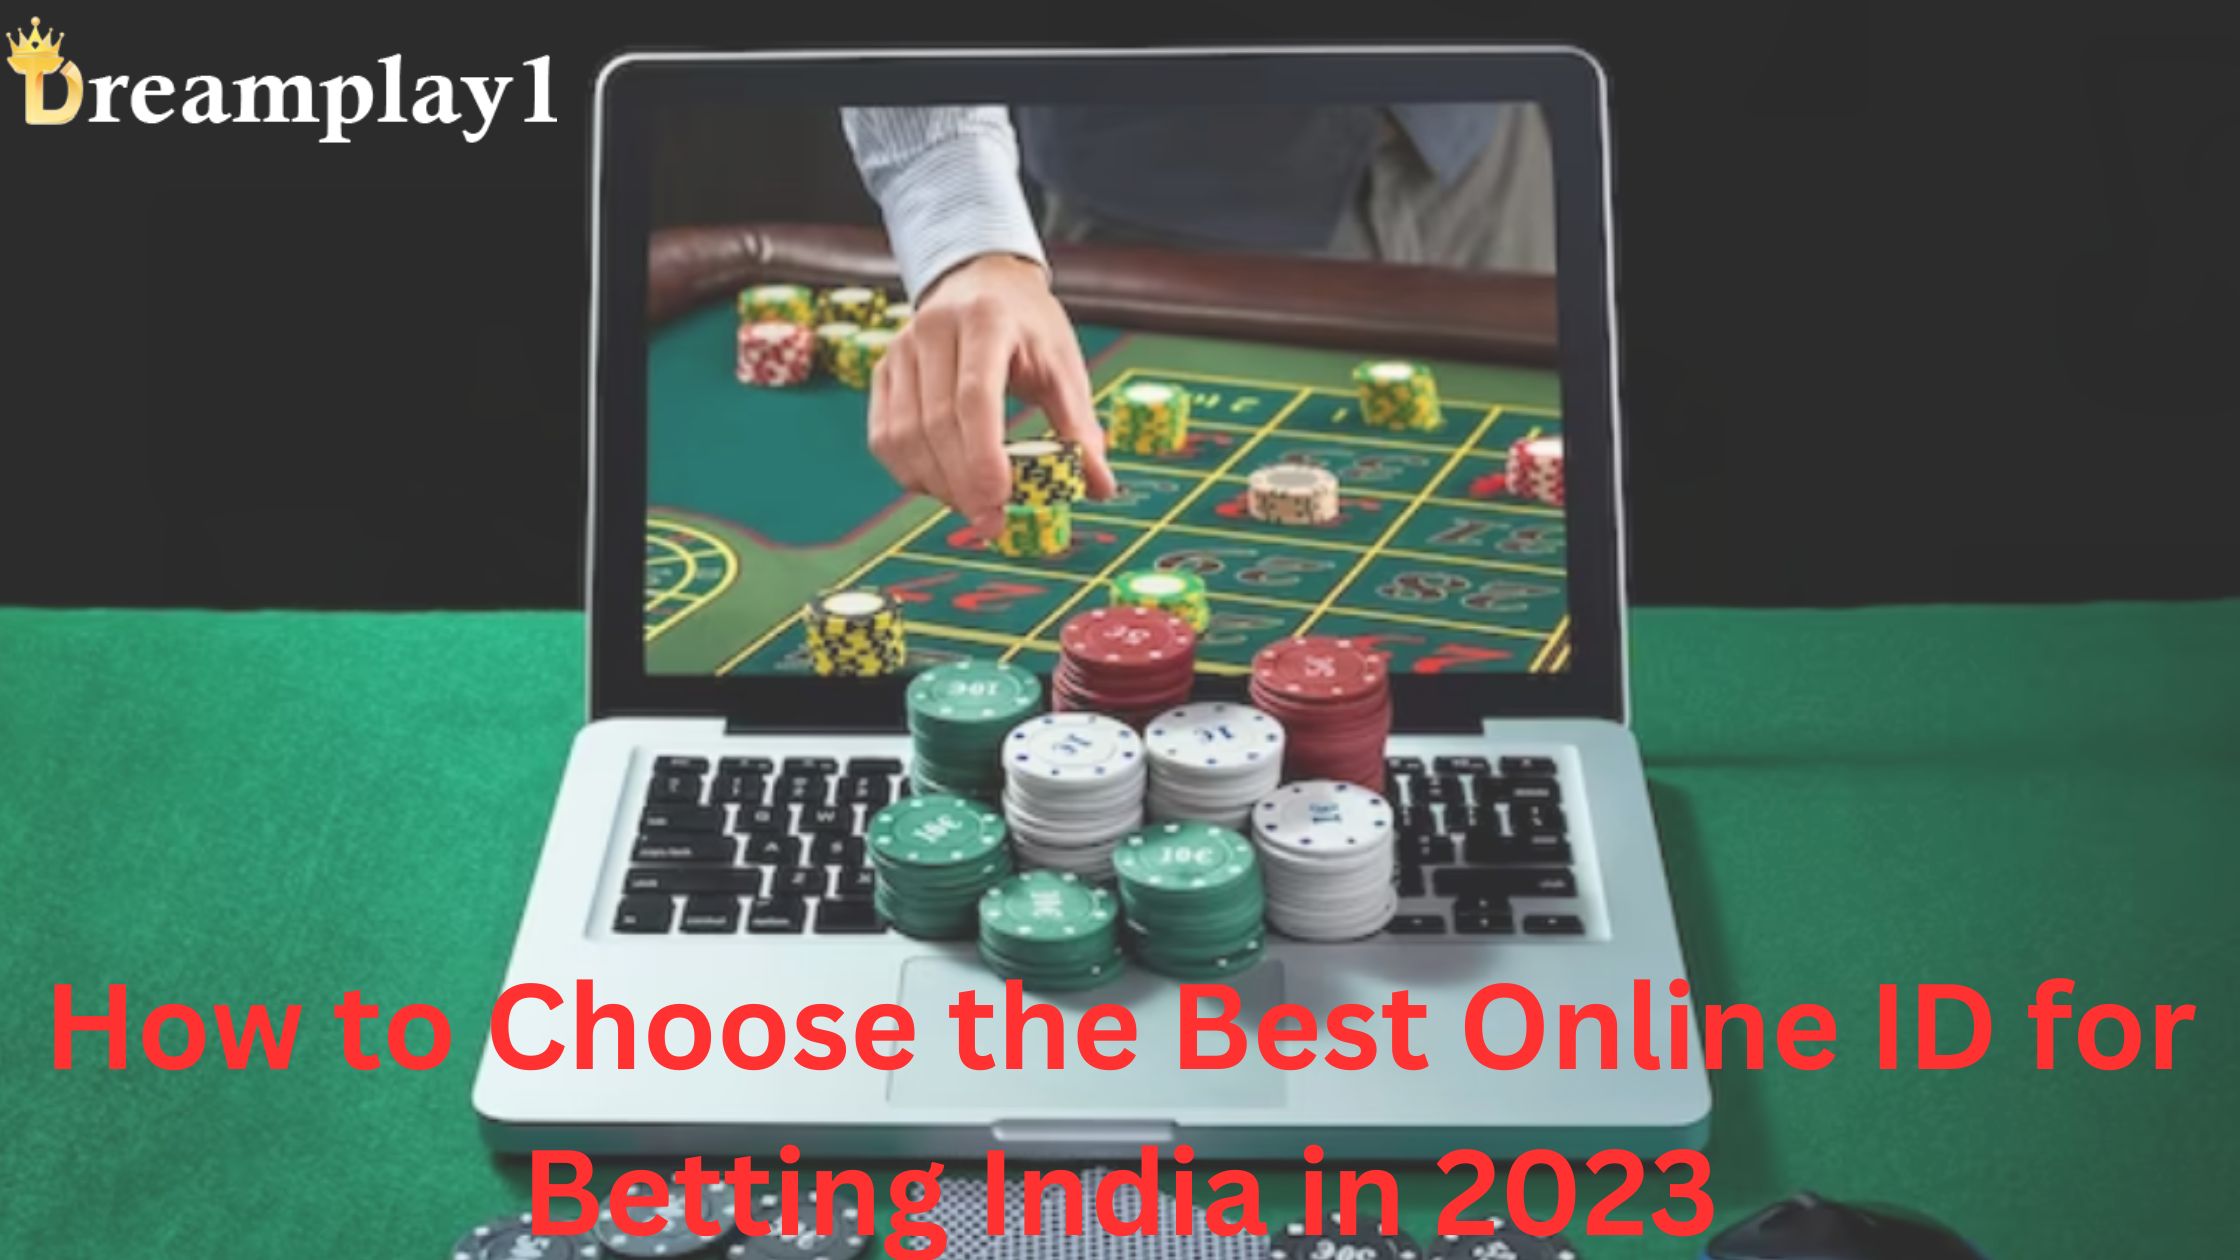 How to Choose the Best Online ID for Betting India in 2024